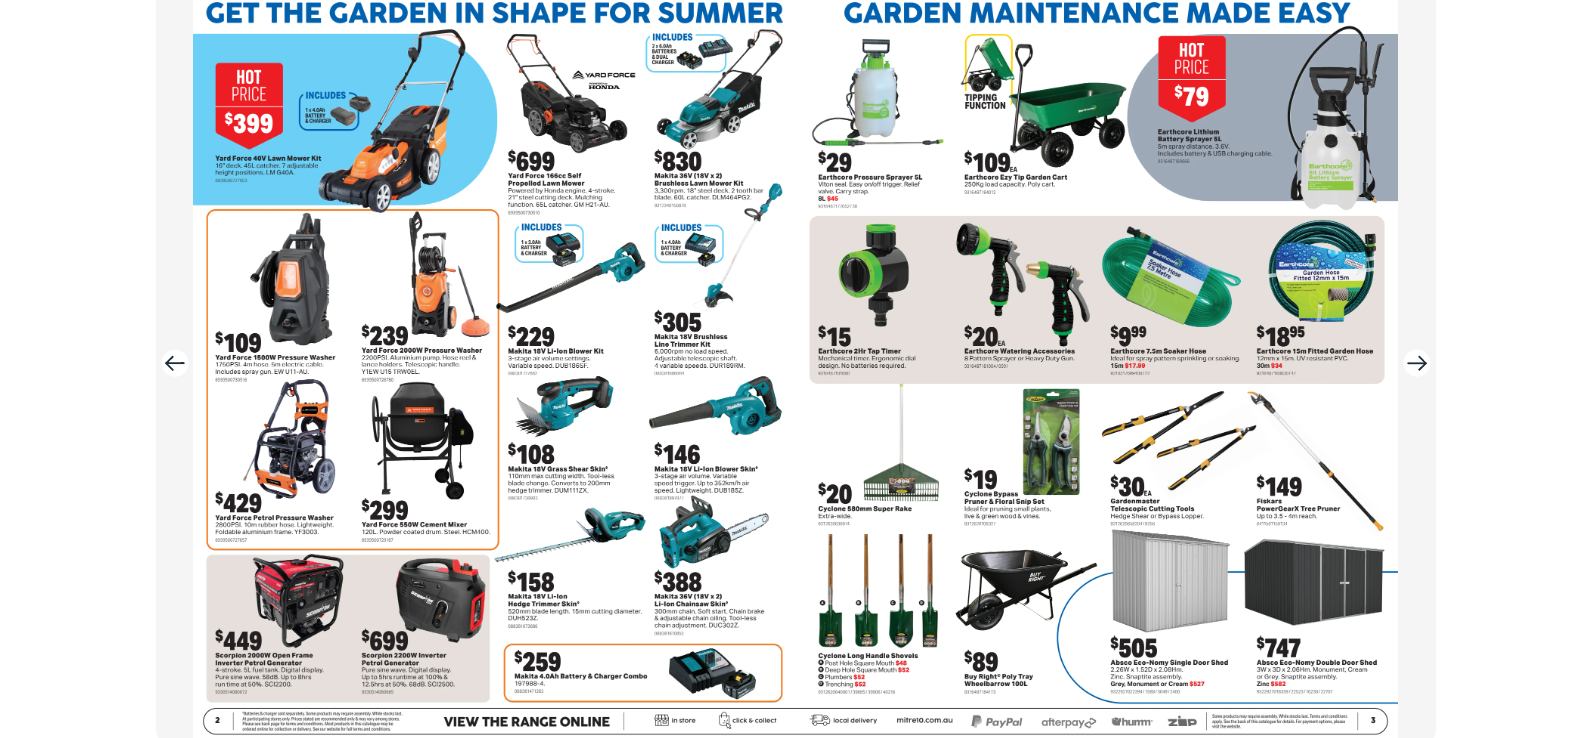 Mitre10 Latest Catalogue - Hot prices on tools, sheds, lounge sets  & more